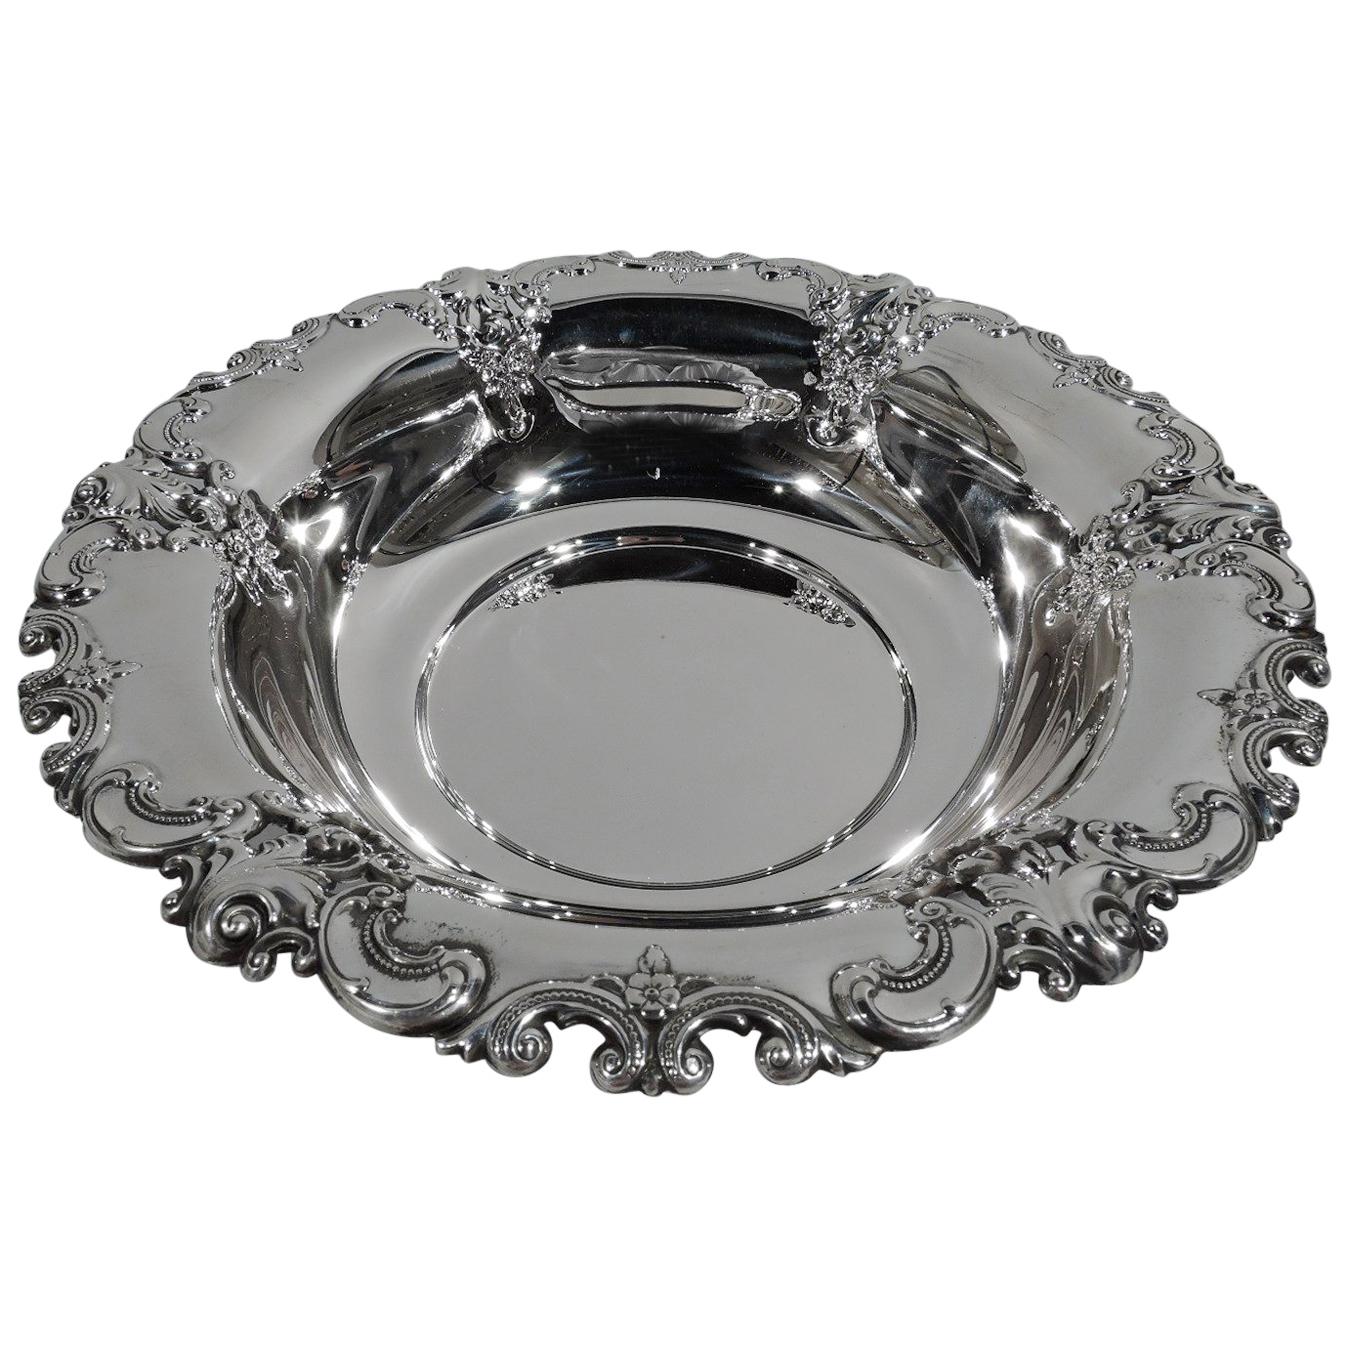 Wallace Sterling Silver Serving Bowl in Classic Grande Baroque Pattern